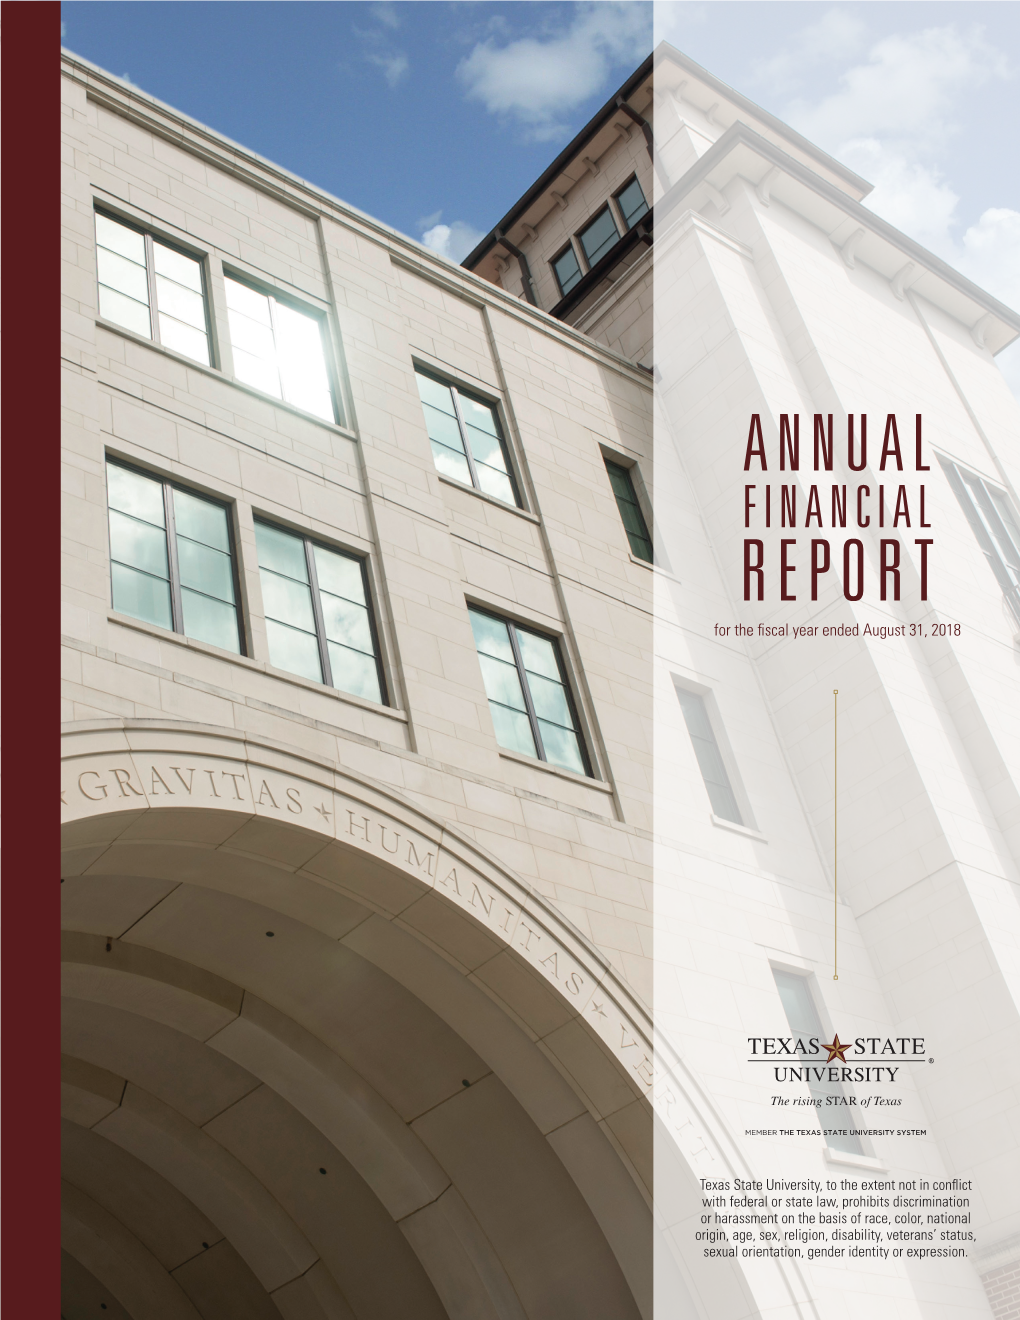 ANNUAL FINANCIAL REPORT for the Fiscal Year Ended August 31, 2018